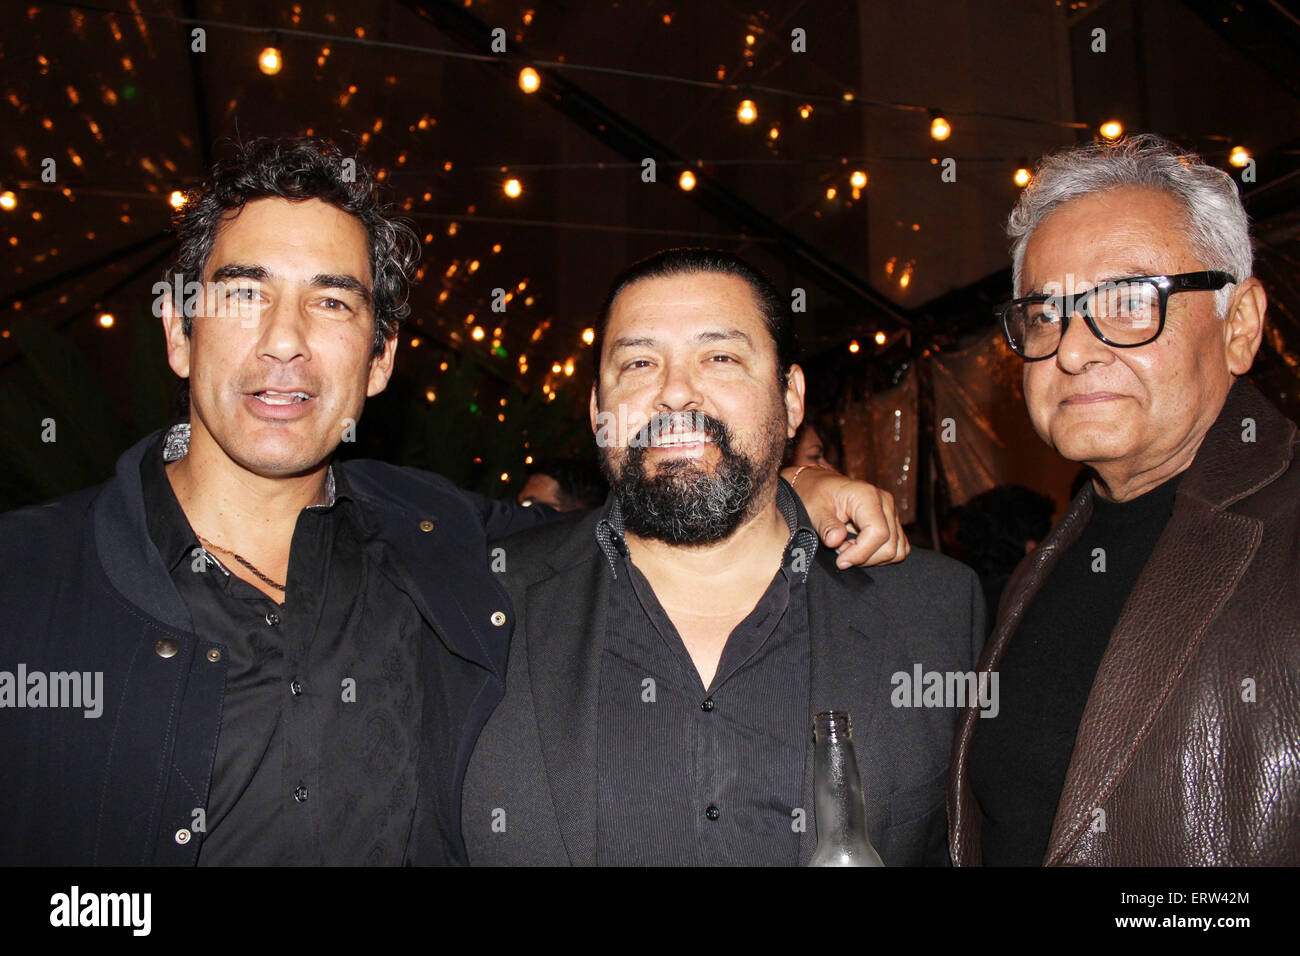 4th Annual Holiday Celebration and Toy Drive hosted by Nosotros and Latin Heat  Featuring: Randy Vasquez,Daniel Edward Mora,Vance Valencia Where: Hollywood, California, United States When: 03 Dec 2014 Credit: Tai Urban/WENN.com Stock Photo